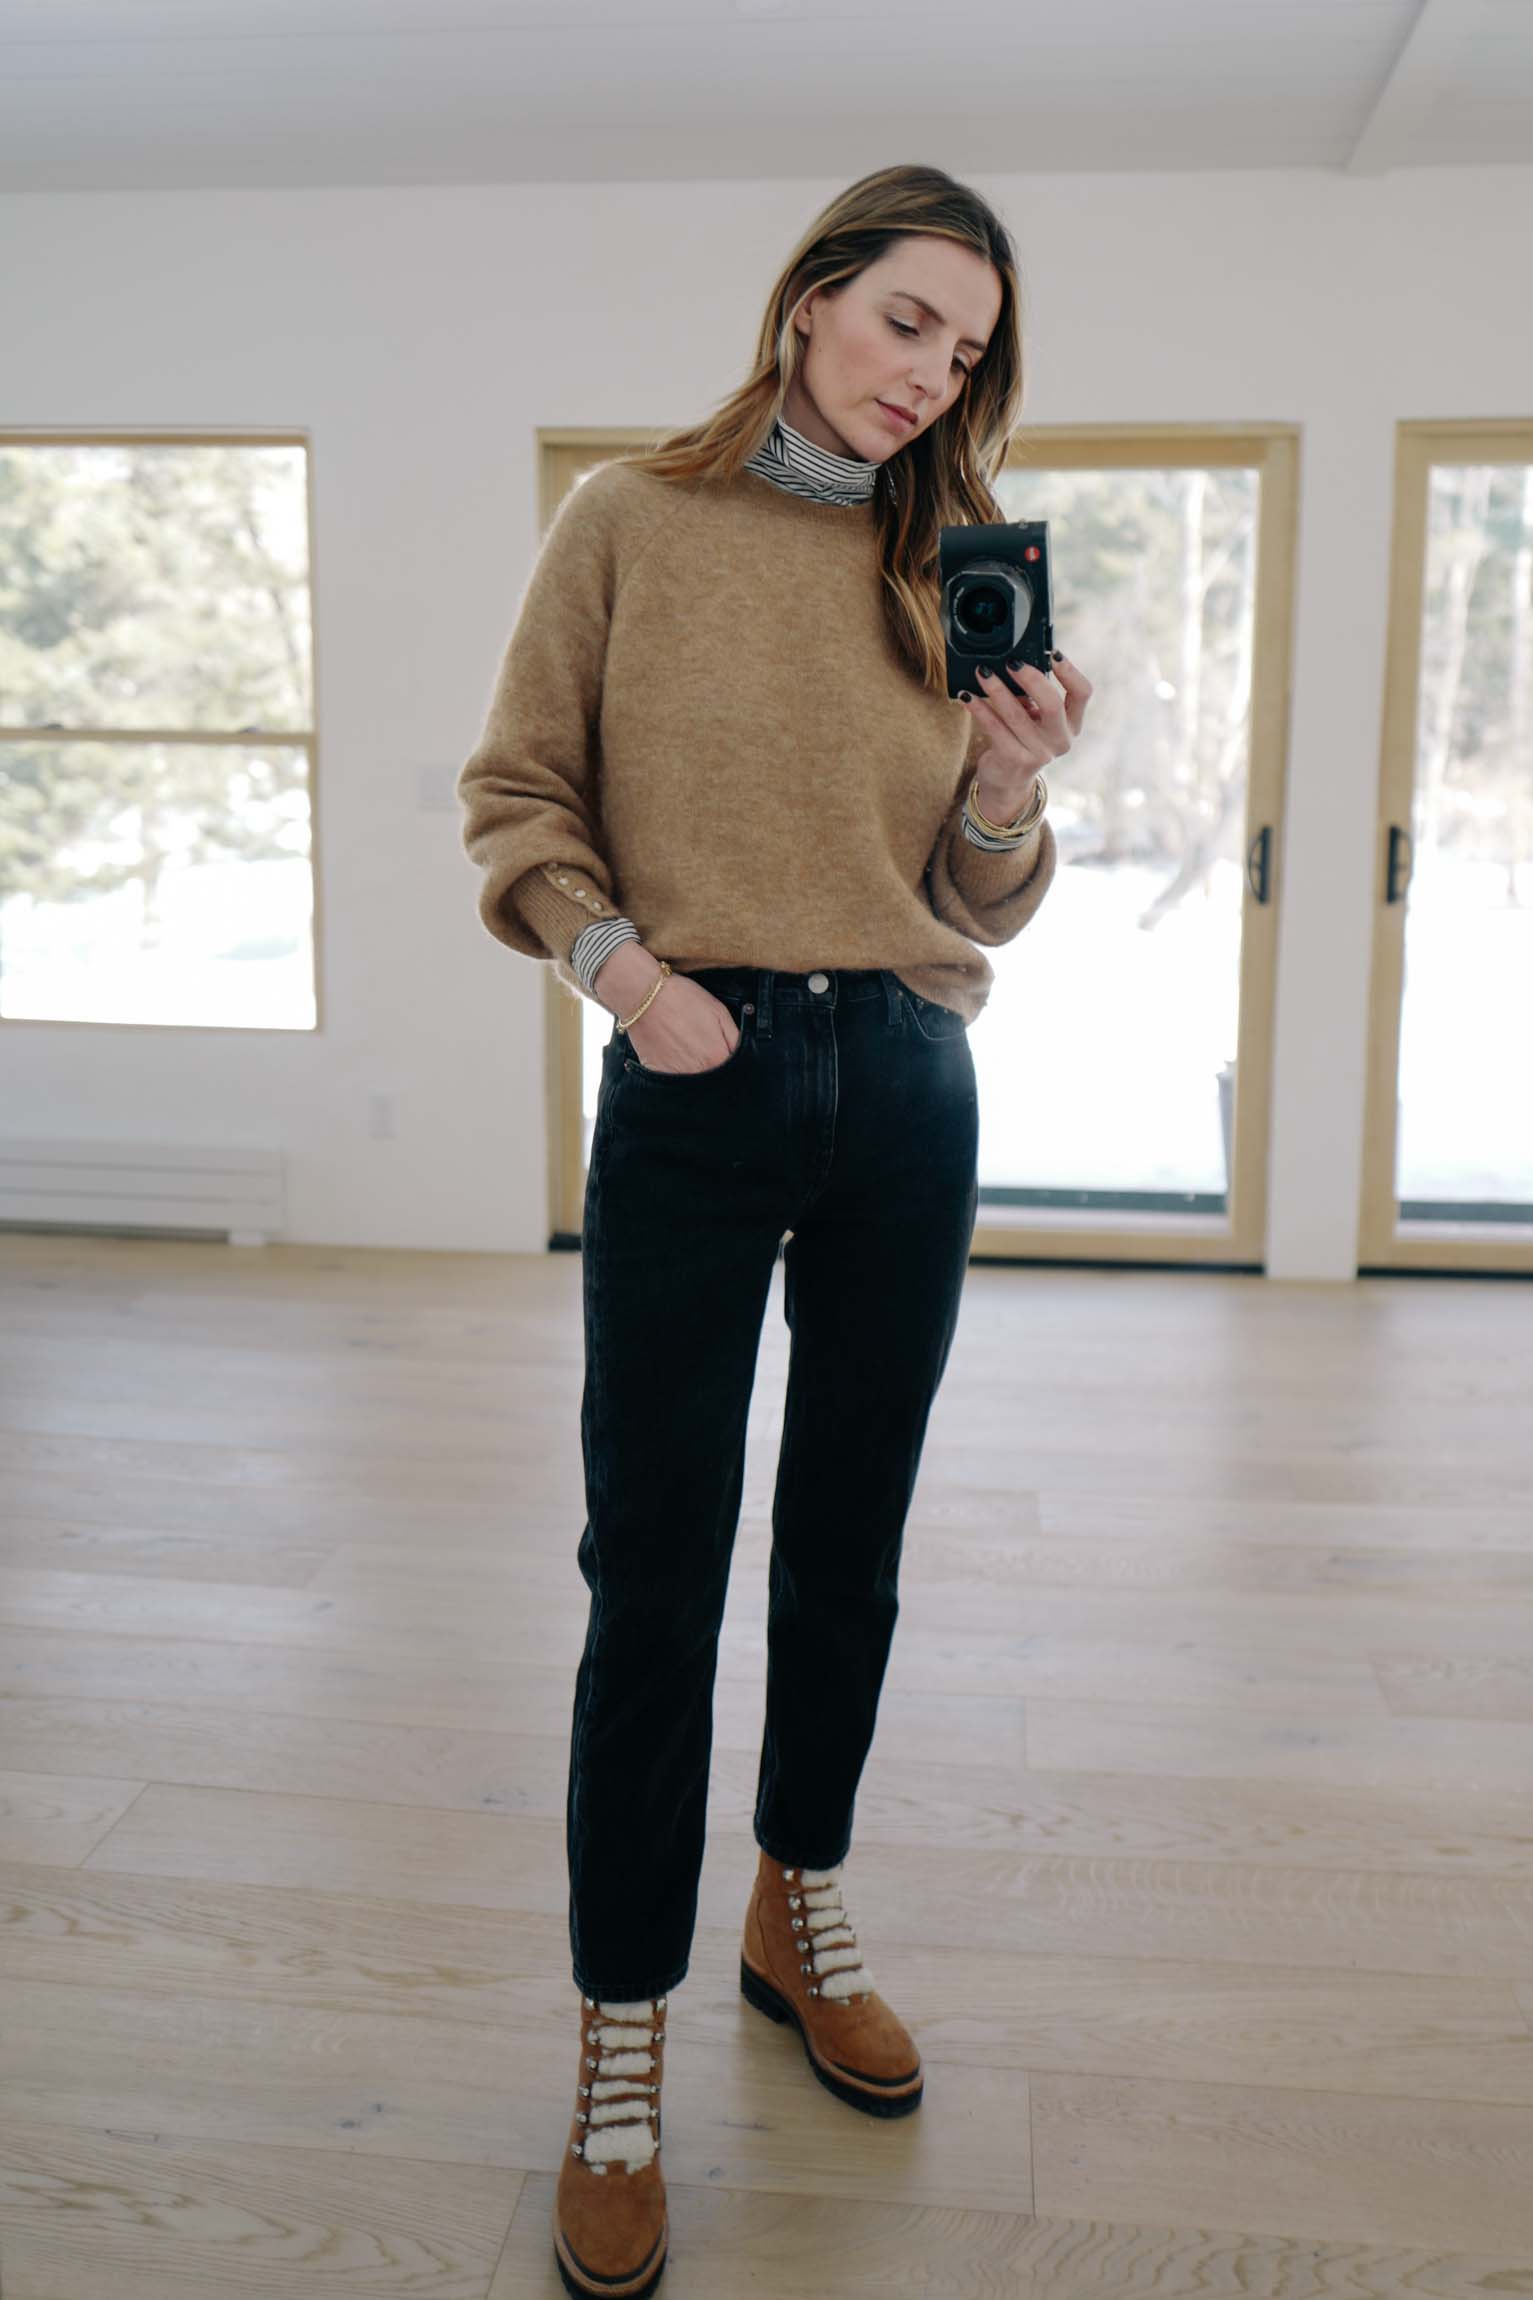 Winter Outfits With Jeans